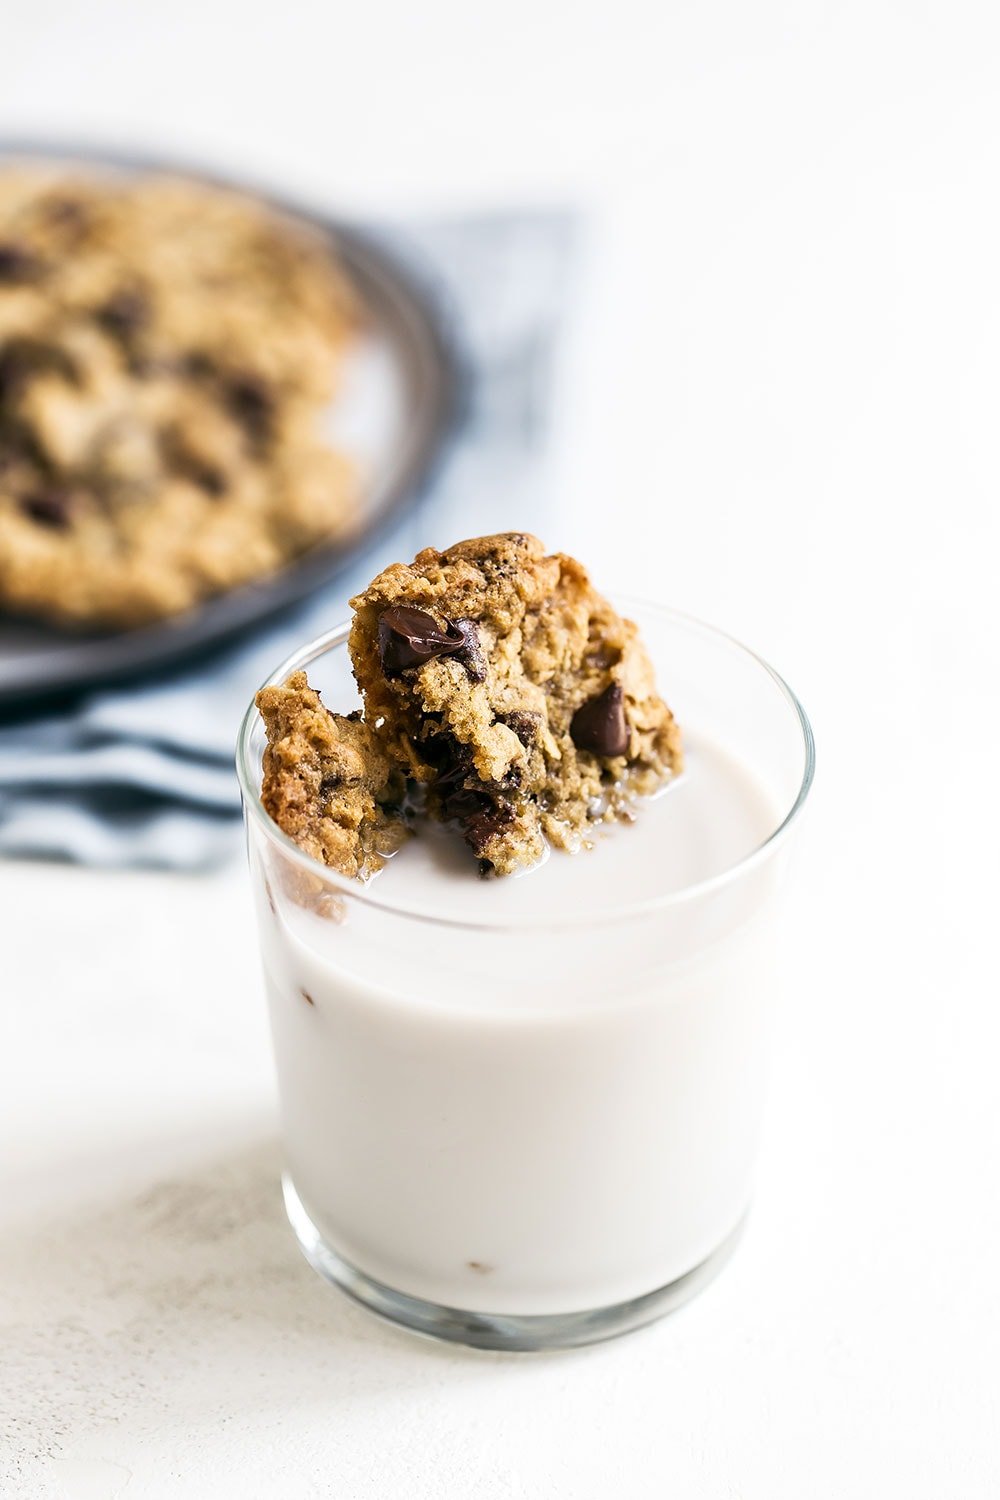 Cookies sitting in a glass of cold milk, ready to be enjoyed